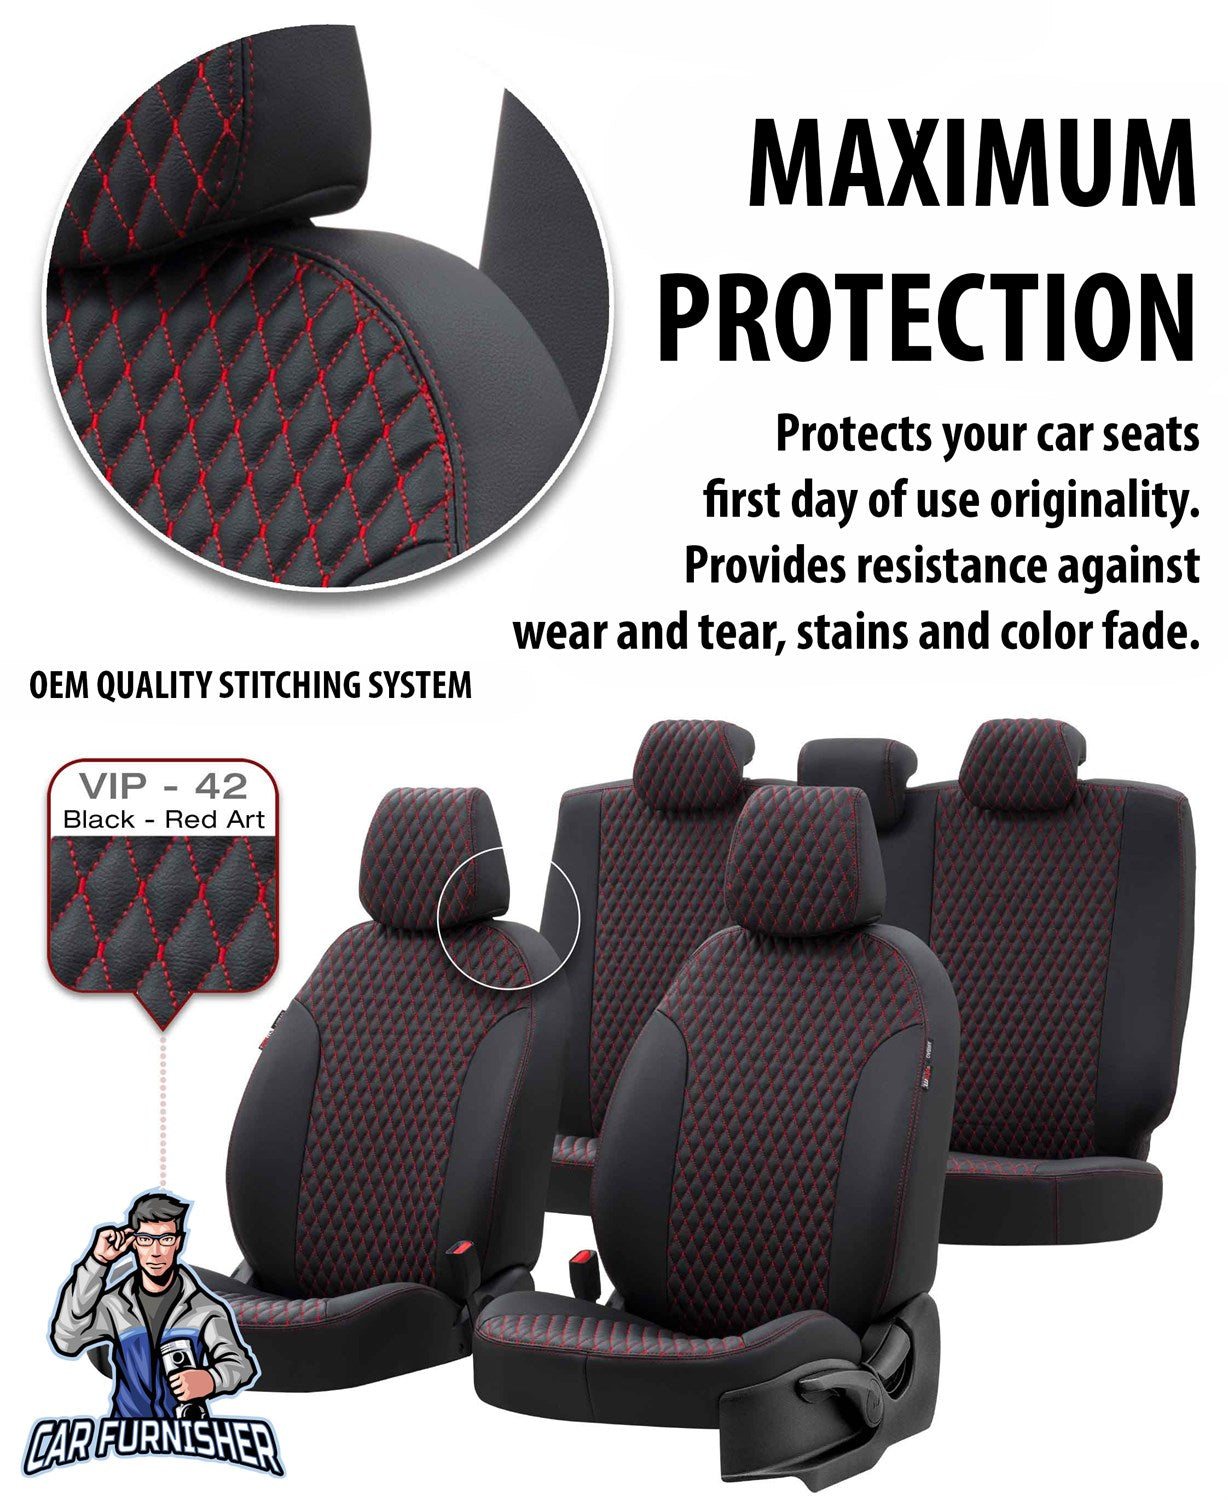 Chevrolet Spark Seat Covers Amsterdam Leather Design Dark Gray Leather